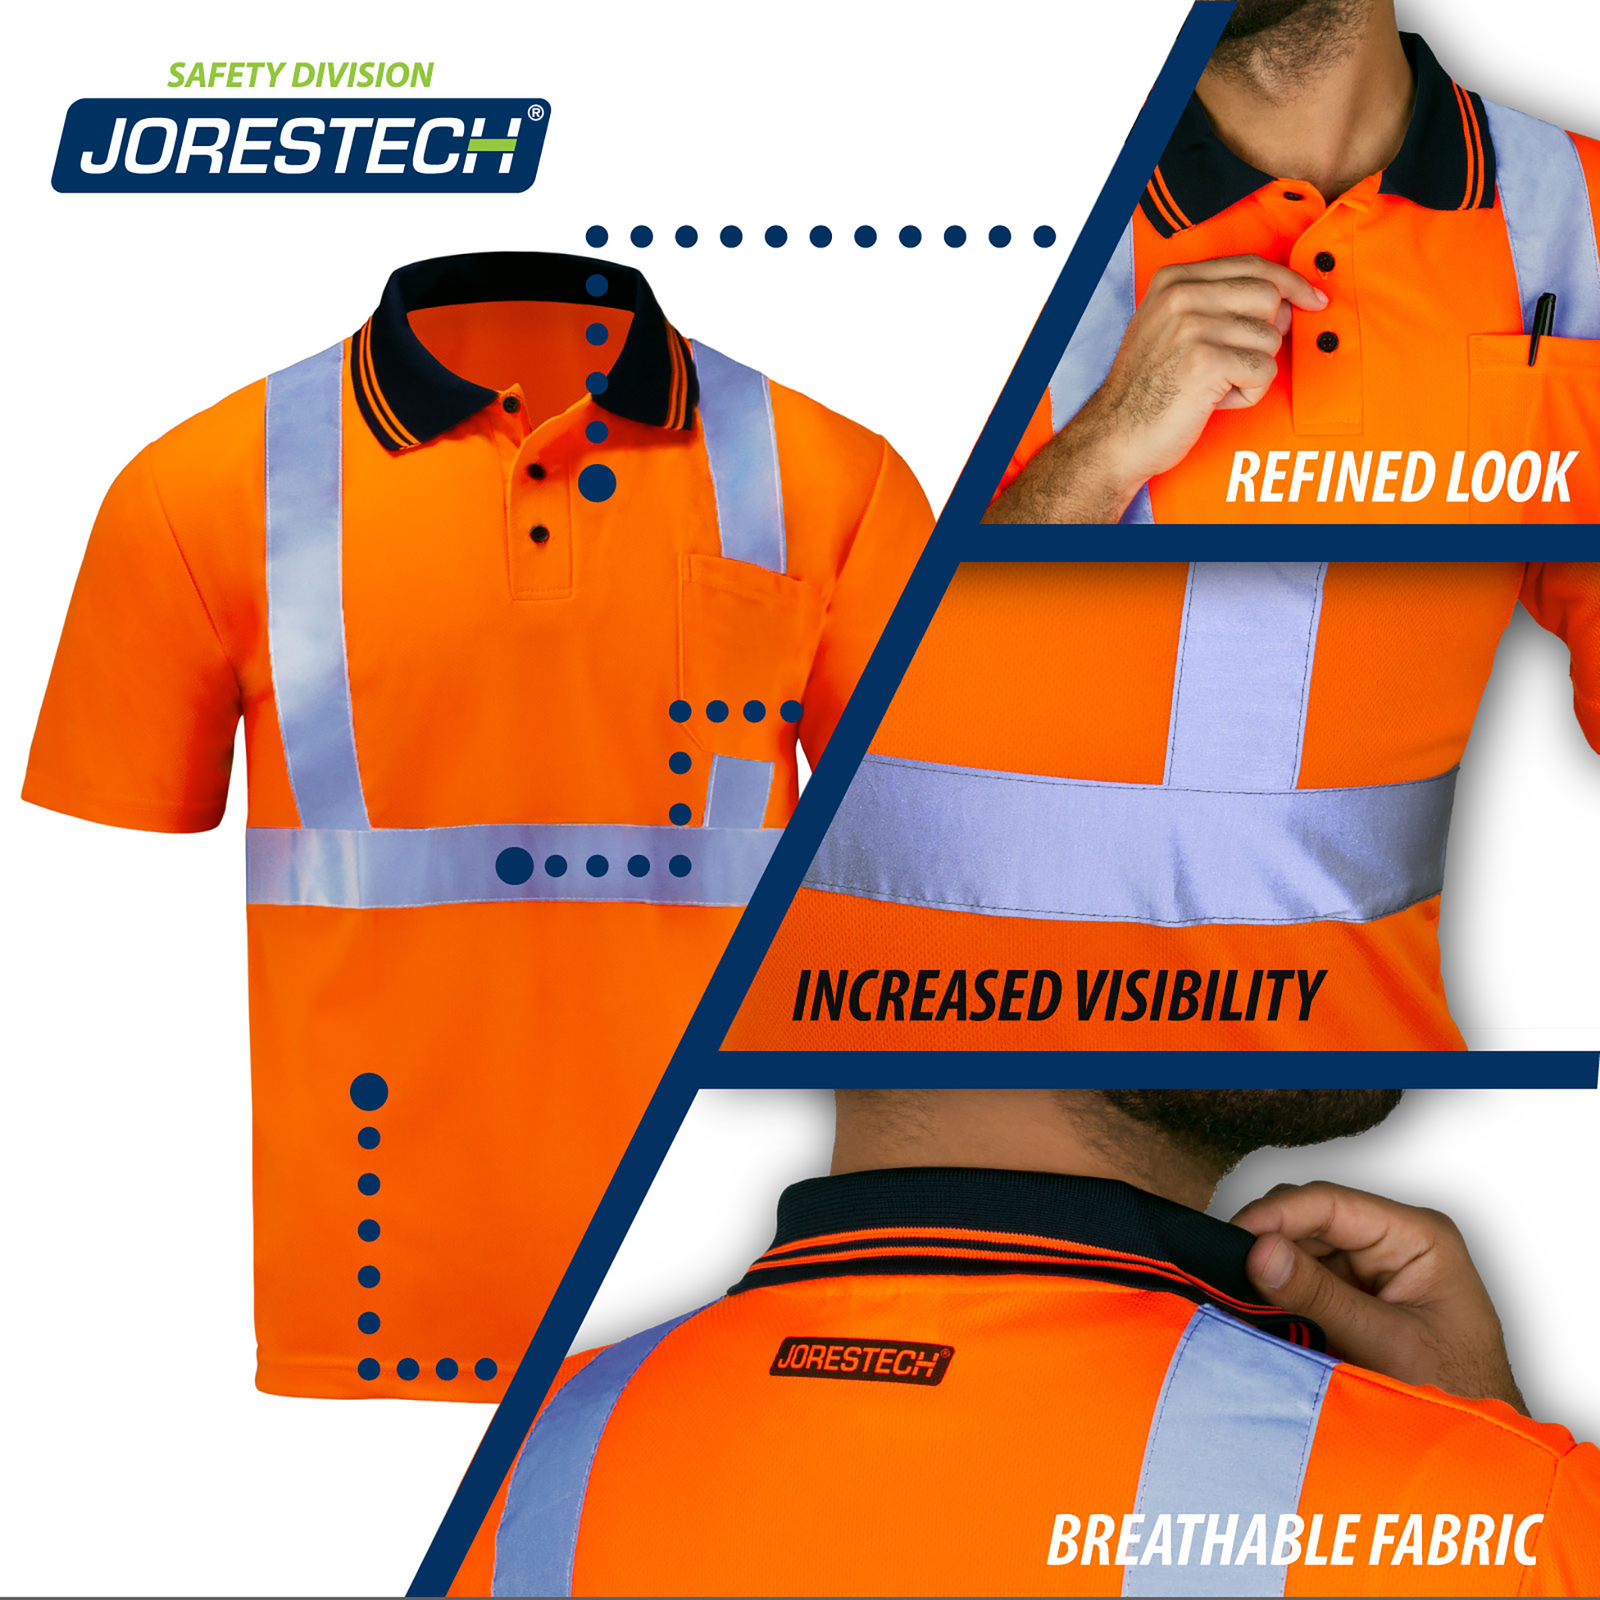 JORESTECH orange polo safety shirt and 3 call outs that read: refined look, increased visibility, breathable fabric.